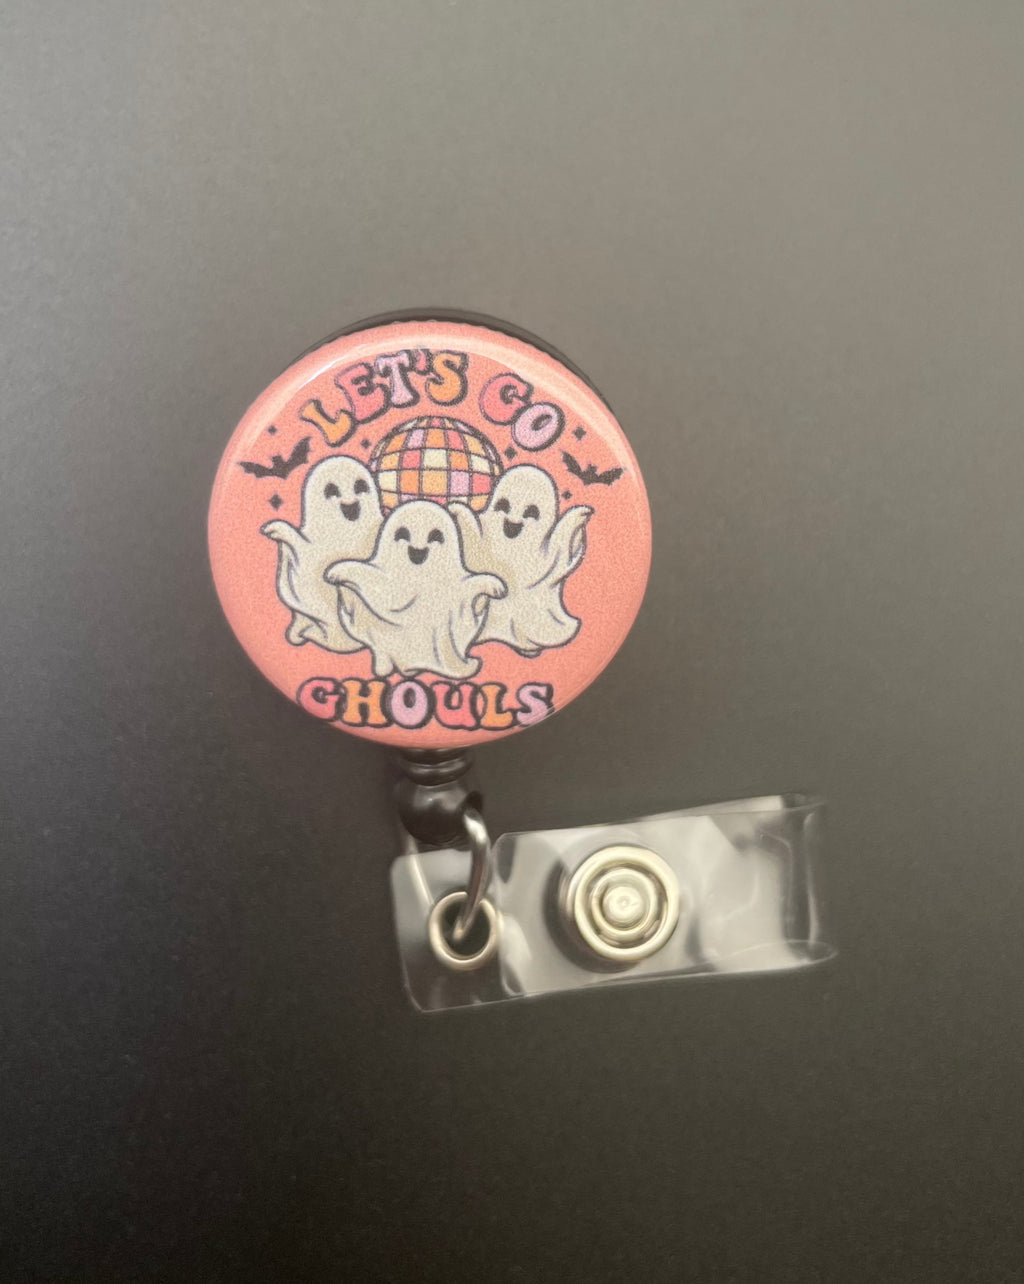 Let's Go Ghouls Retractable ID Badge Holder, Ghost, Halloween, Fall, Fun, Spooky Season, Pink